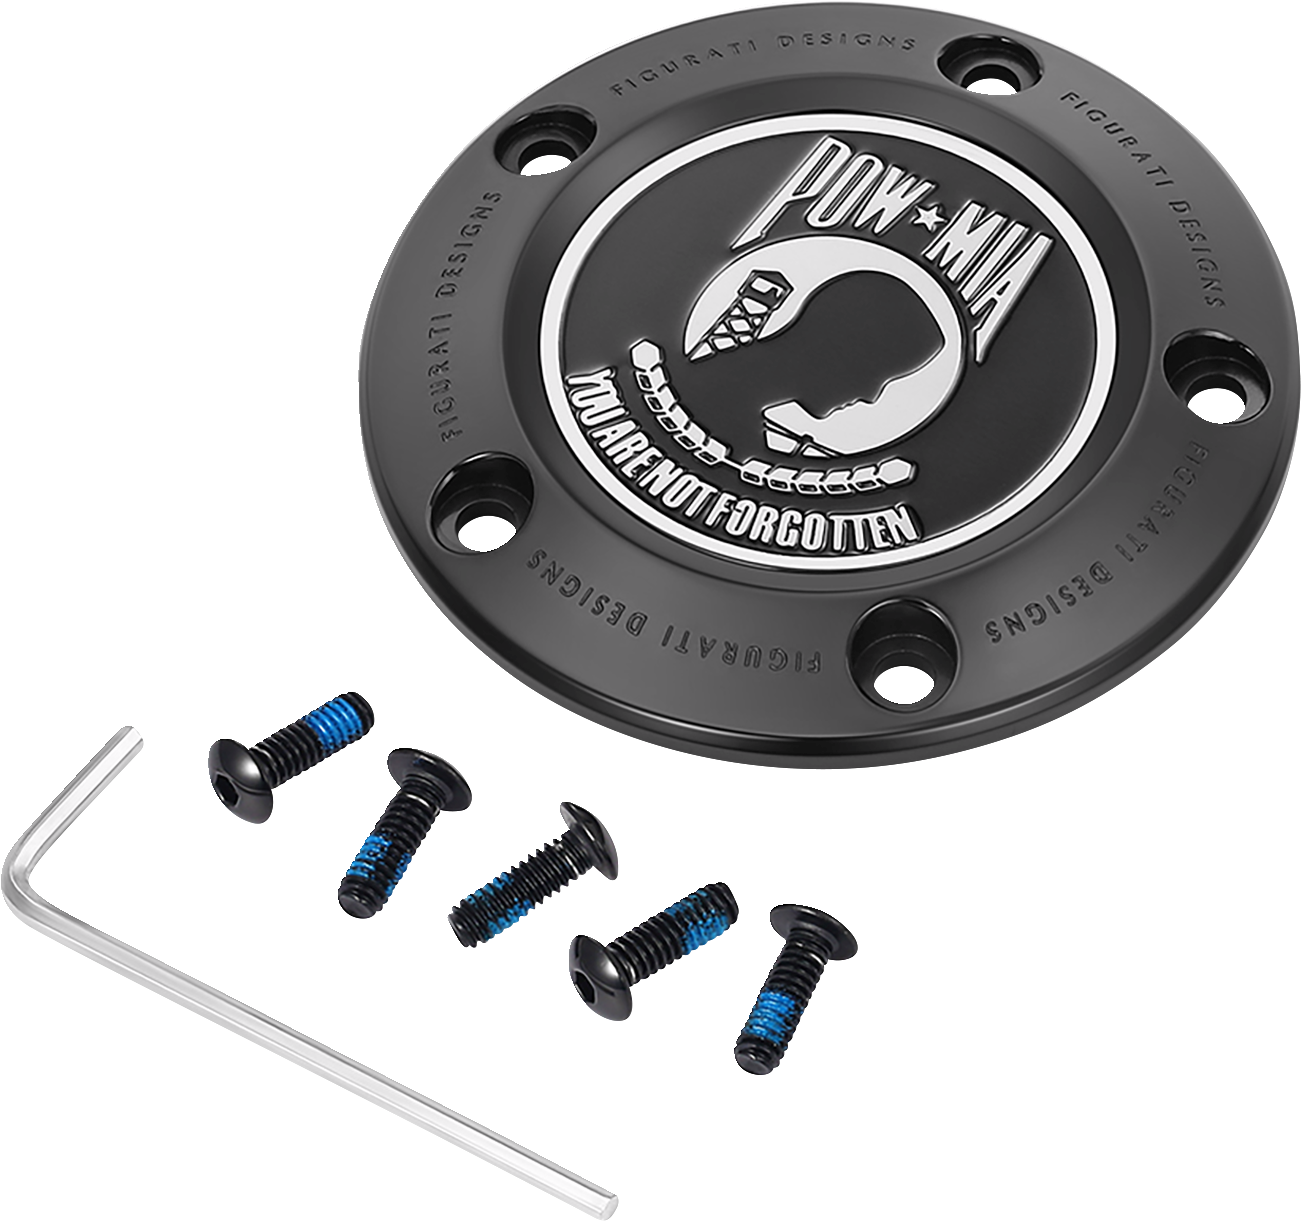 Figurati Designs POW-MIA Stainless Steel Black Timing Cover for 1999-2017 Harley